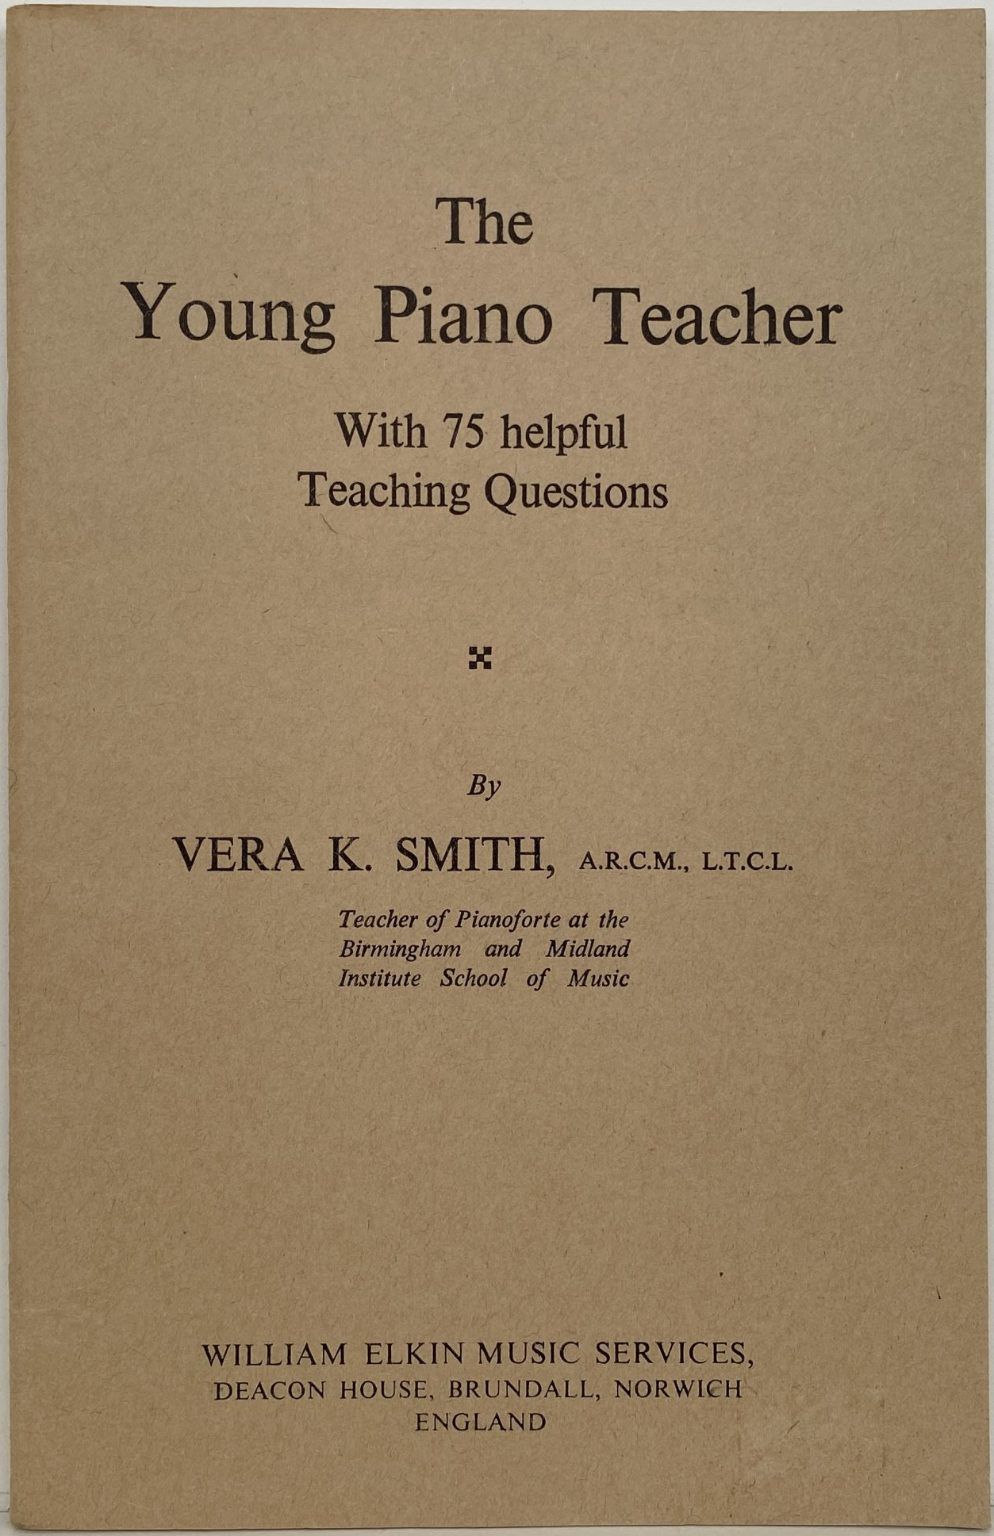 The Young Piano Teacher - With 75 helpful Teaching Questions